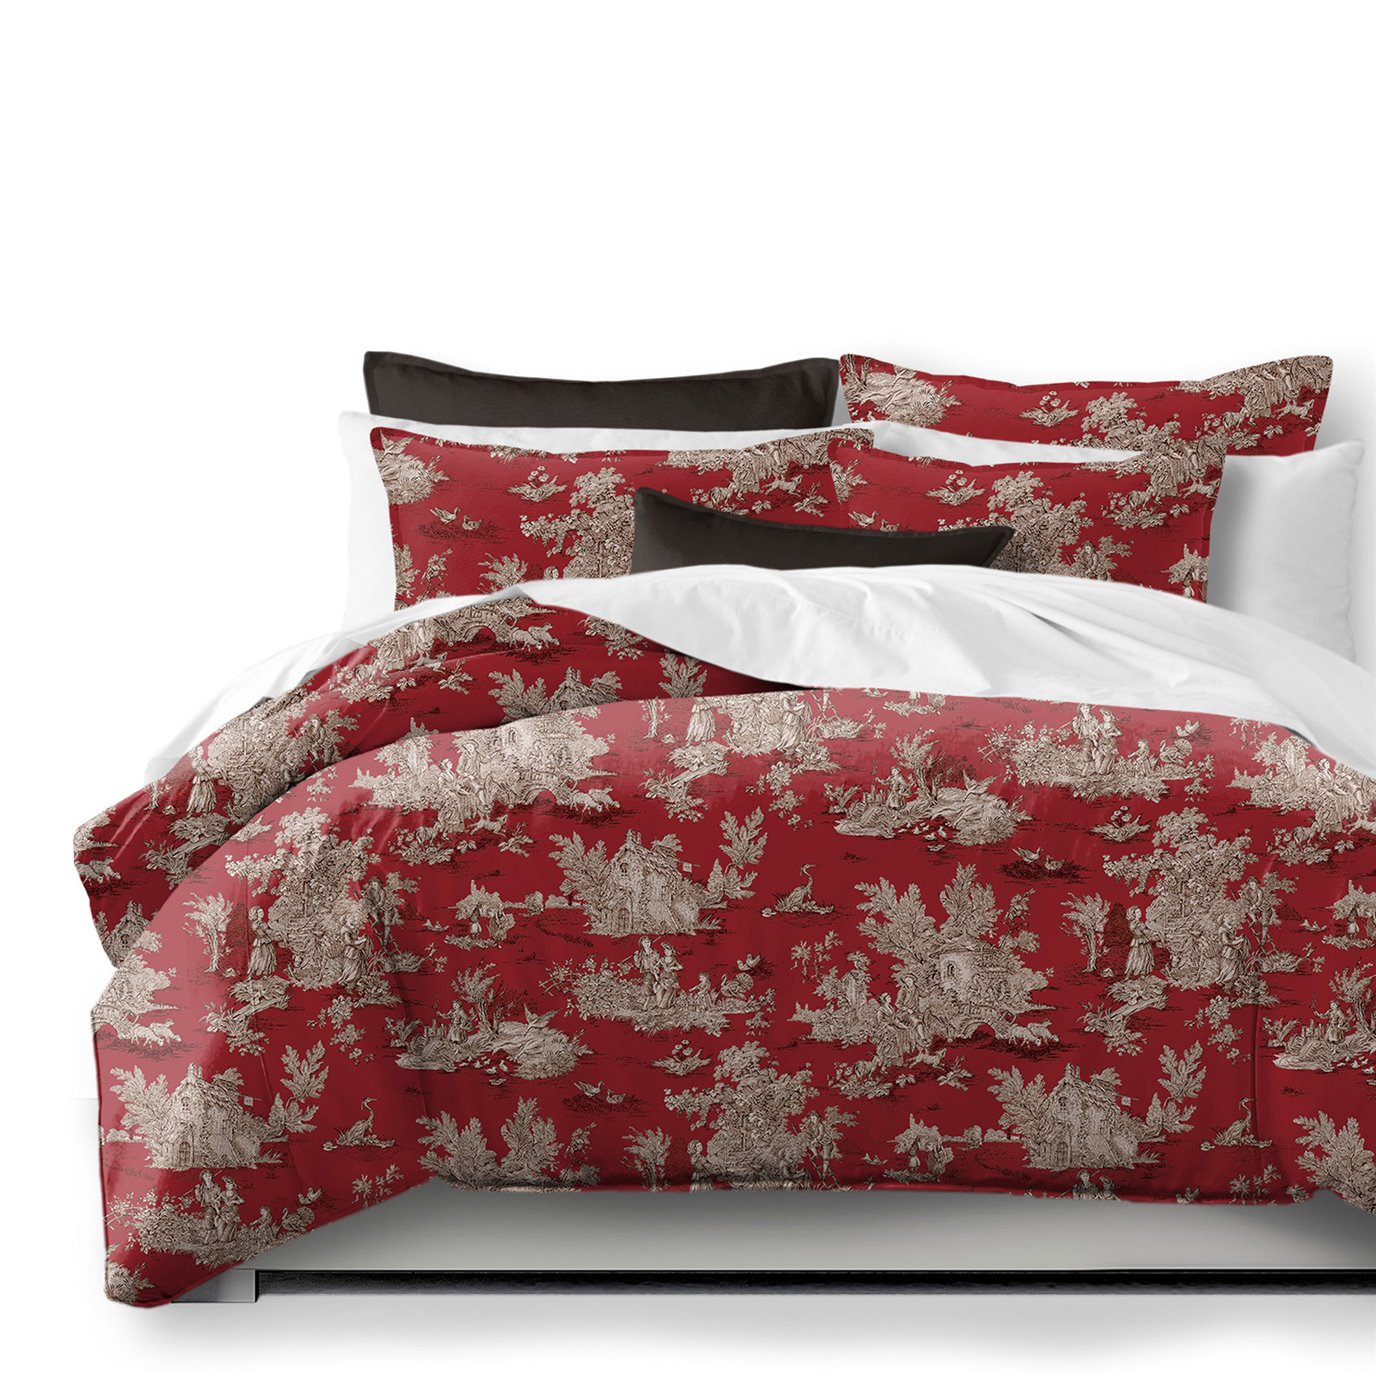 Chateau Red/Black Comforter and Pillow Sham(s) Set - Size Full